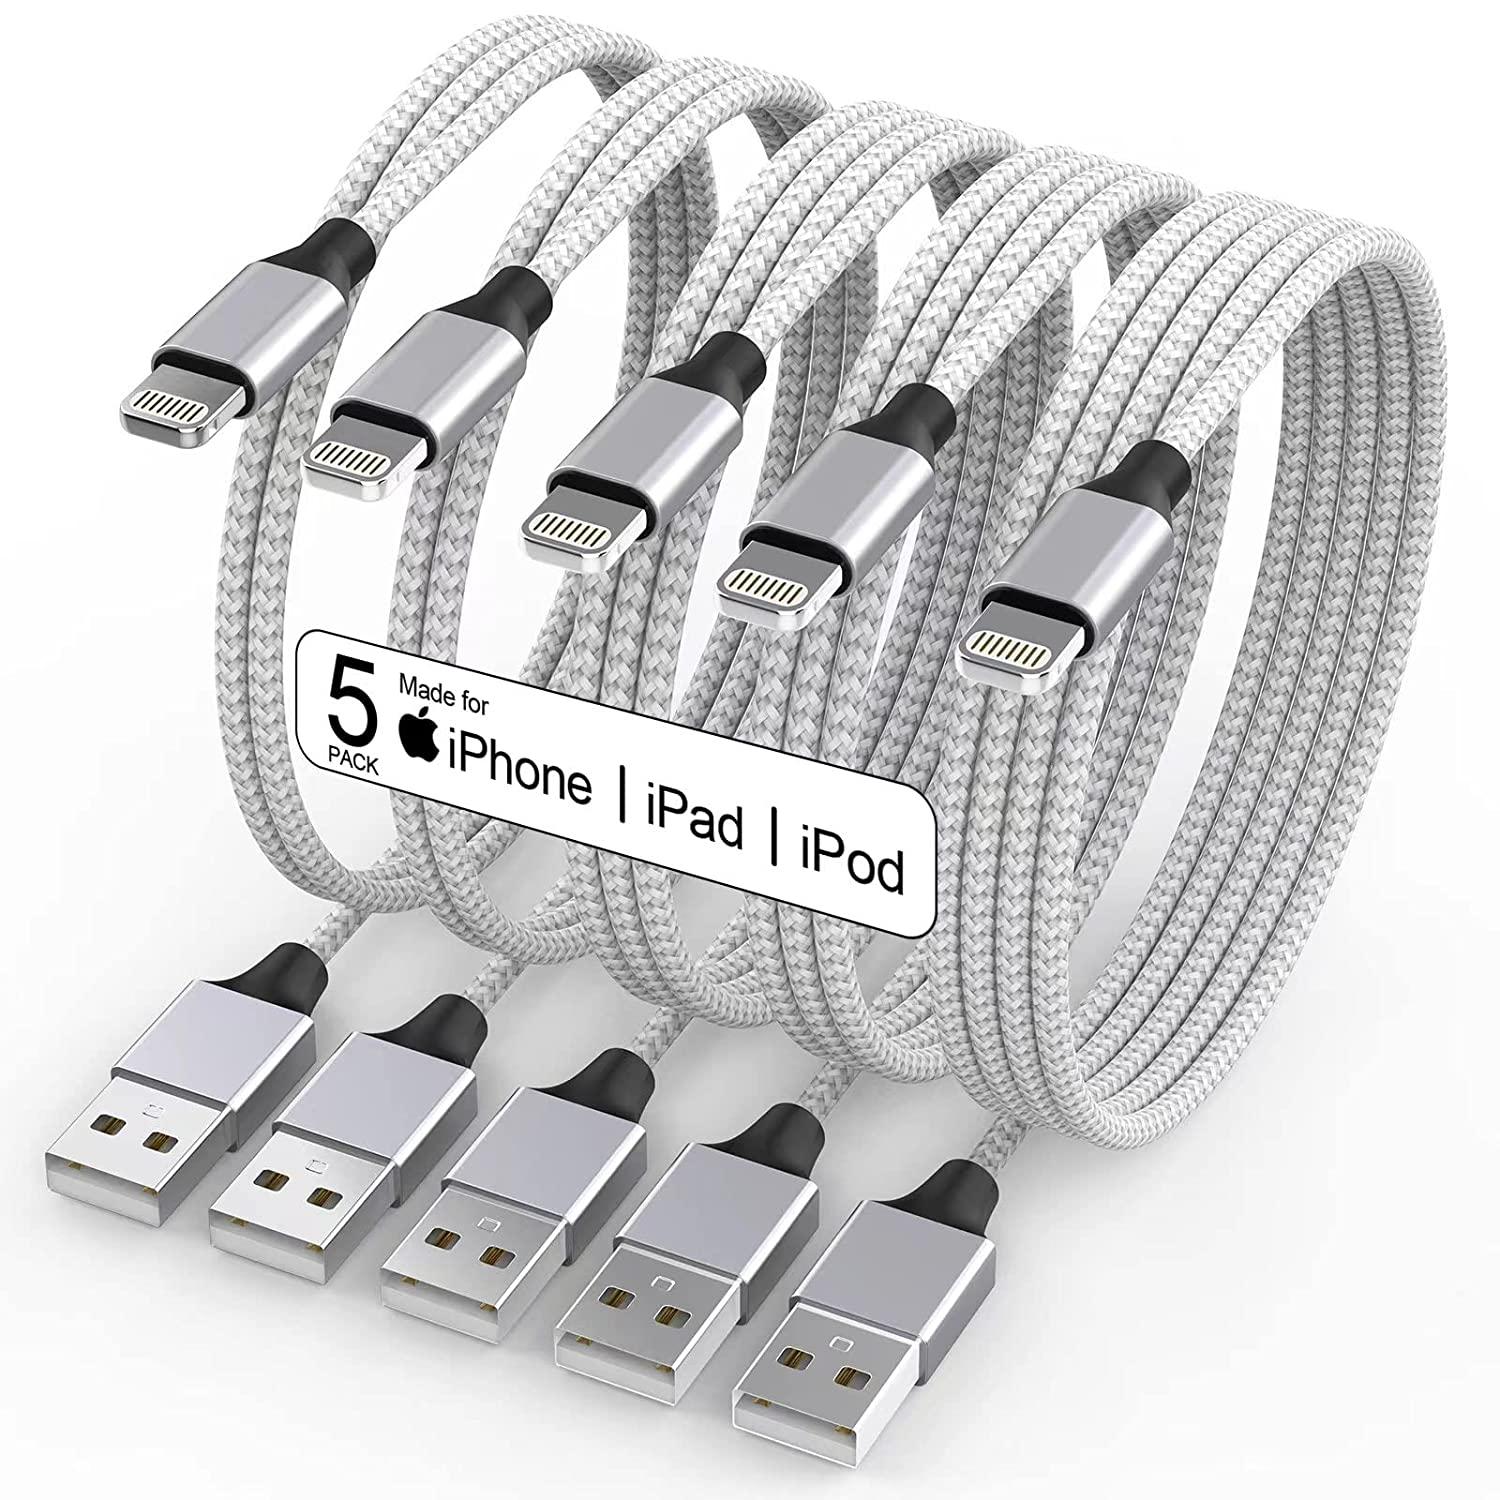 Apple iPhone USB to Lightning Port Charger Cables 5 Pack for $5.99